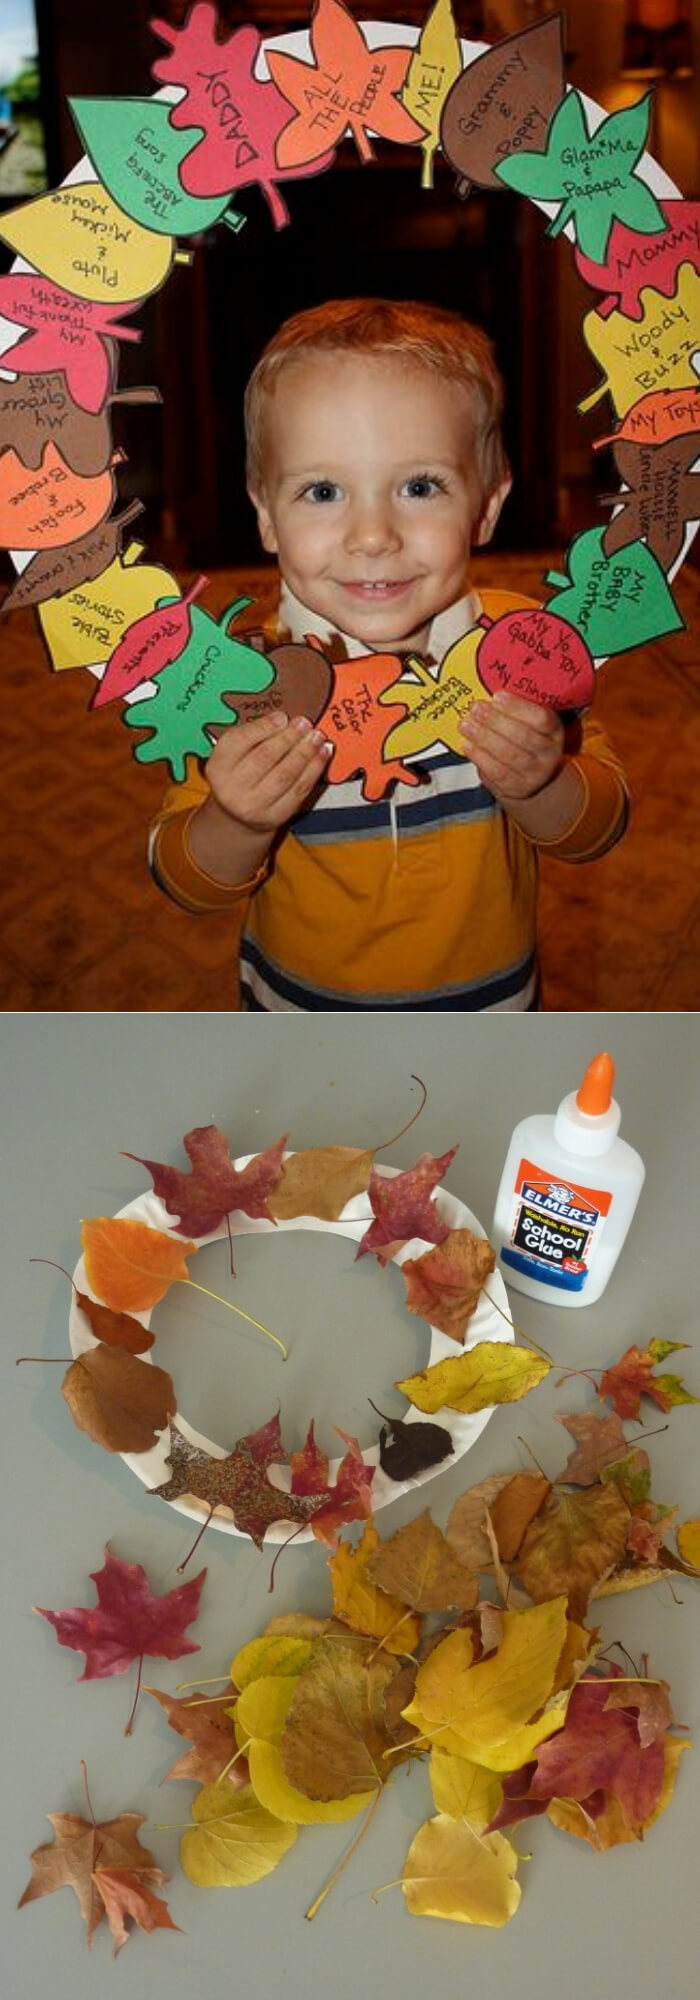 Wreath | Thanksgiving Gifts Kids Can Make - FarmFoodFamily.com